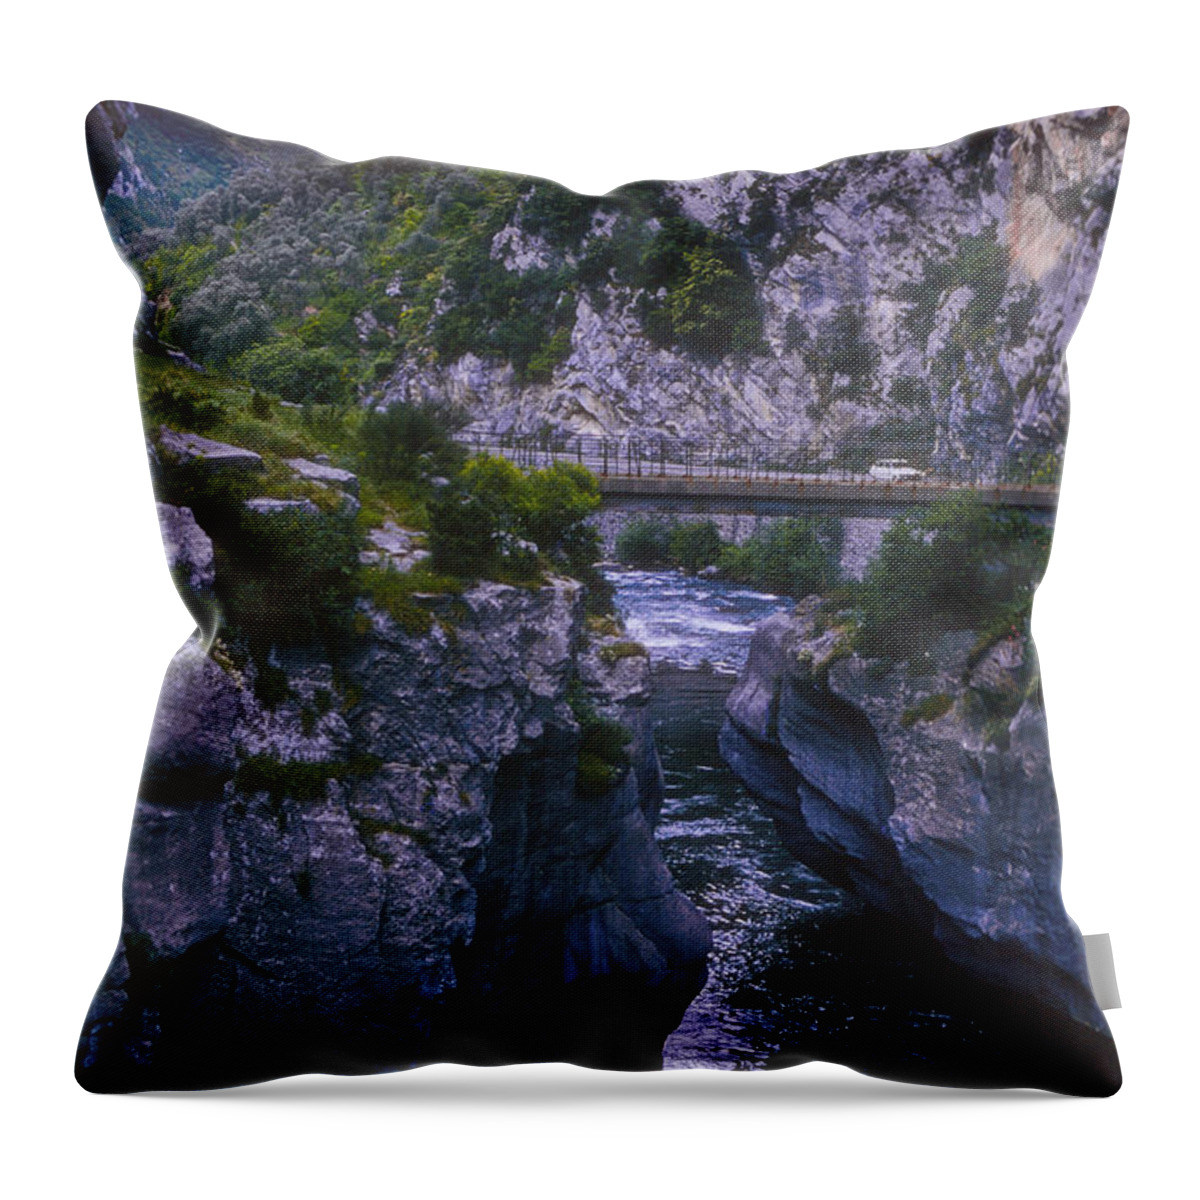 Northern Italian Alps Throw Pillow featuring the photograph Alpine Gorge Crossing by Bob Phillips